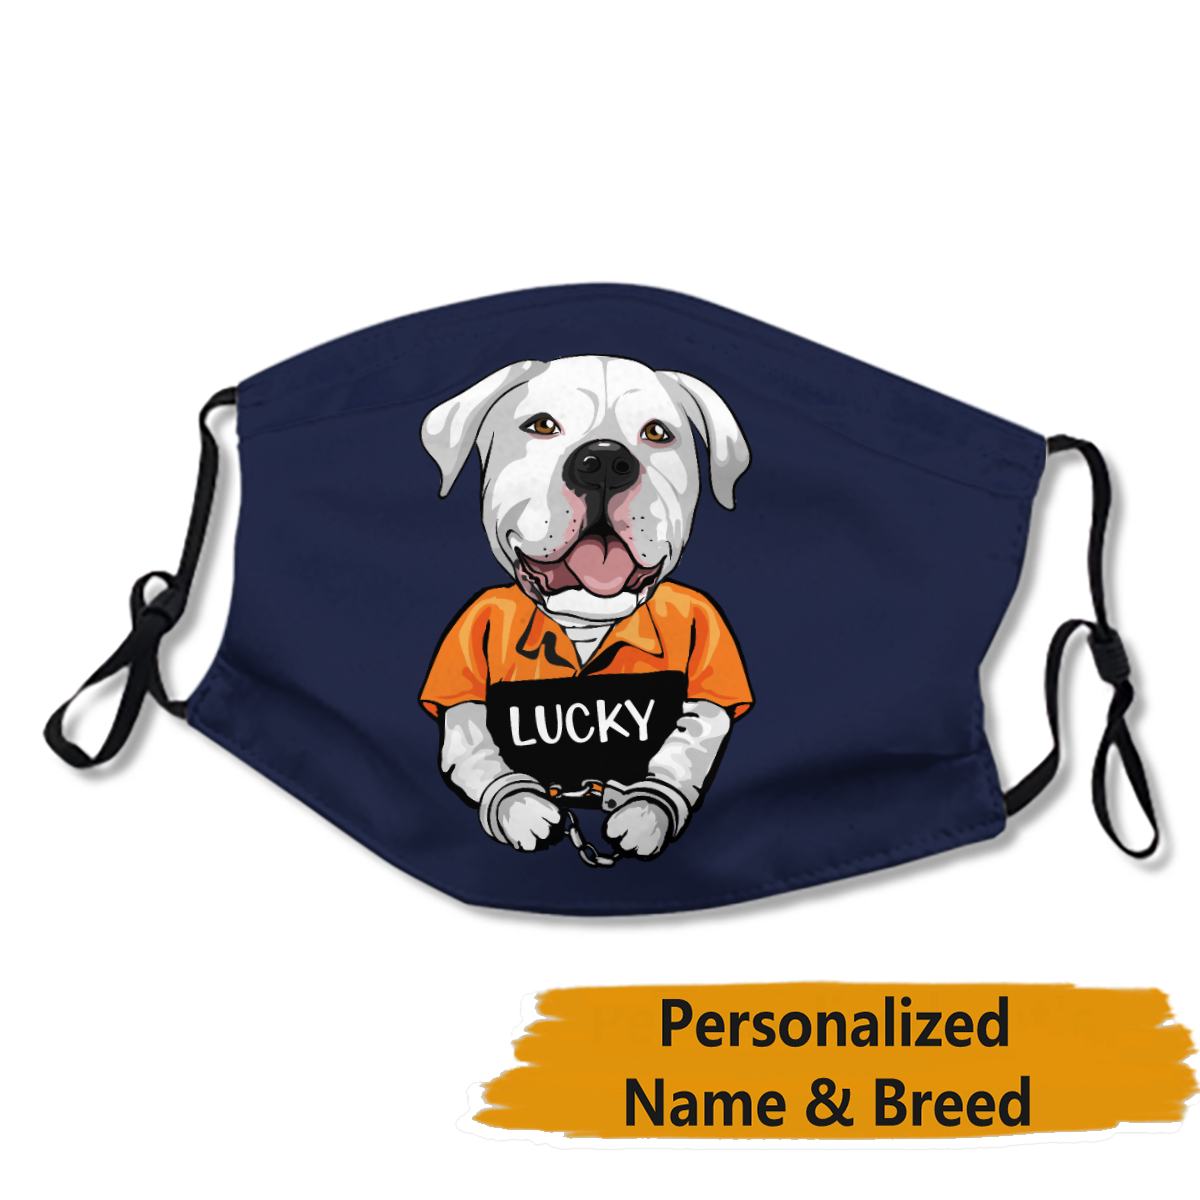 Personalized Dog's Name & Breed Face Mask No.4